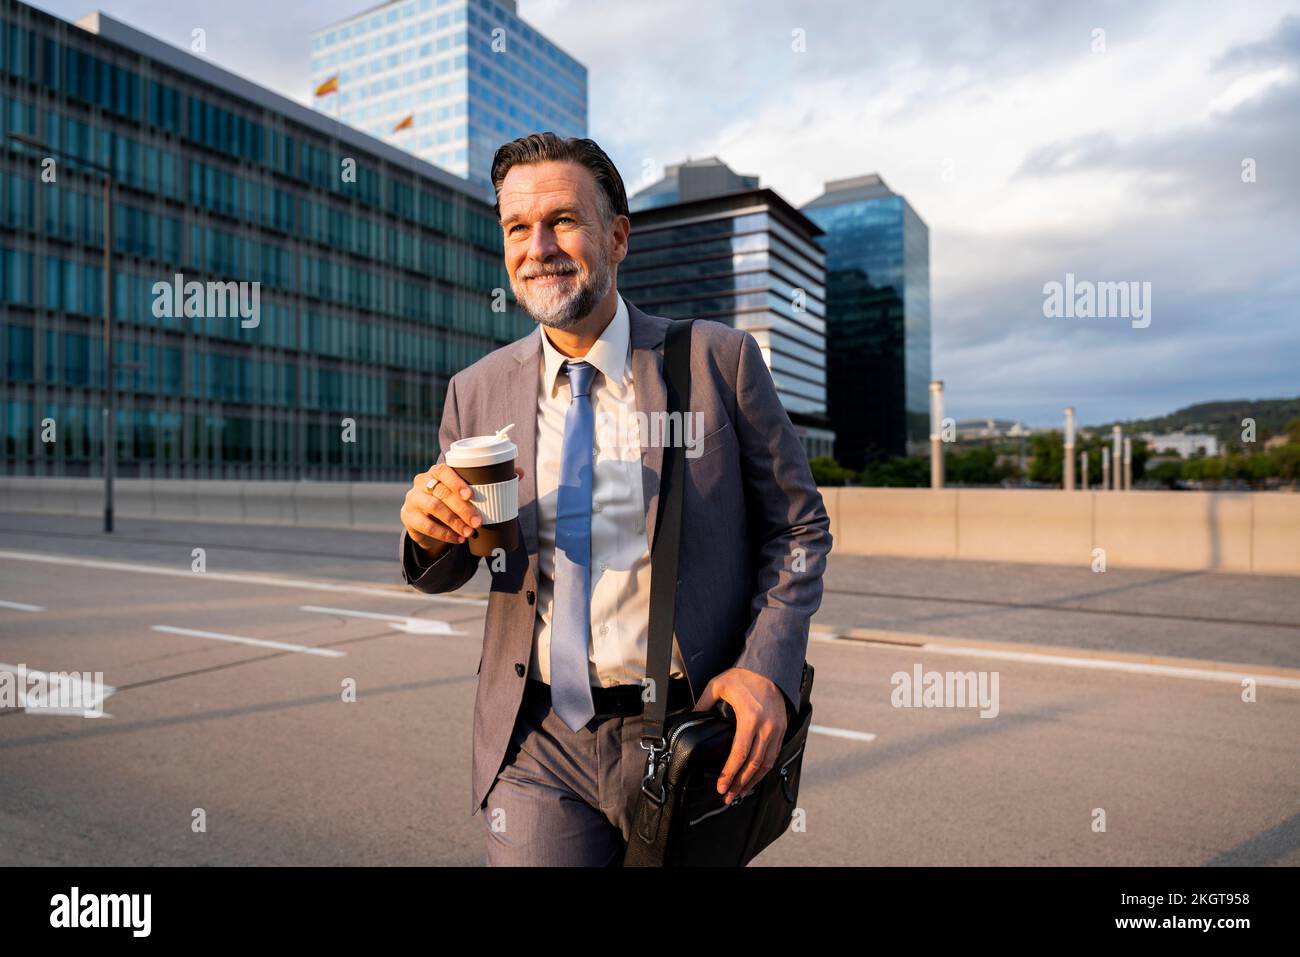 Smiling mature businessman holding disposable coffee cup walking on street Stock Photo